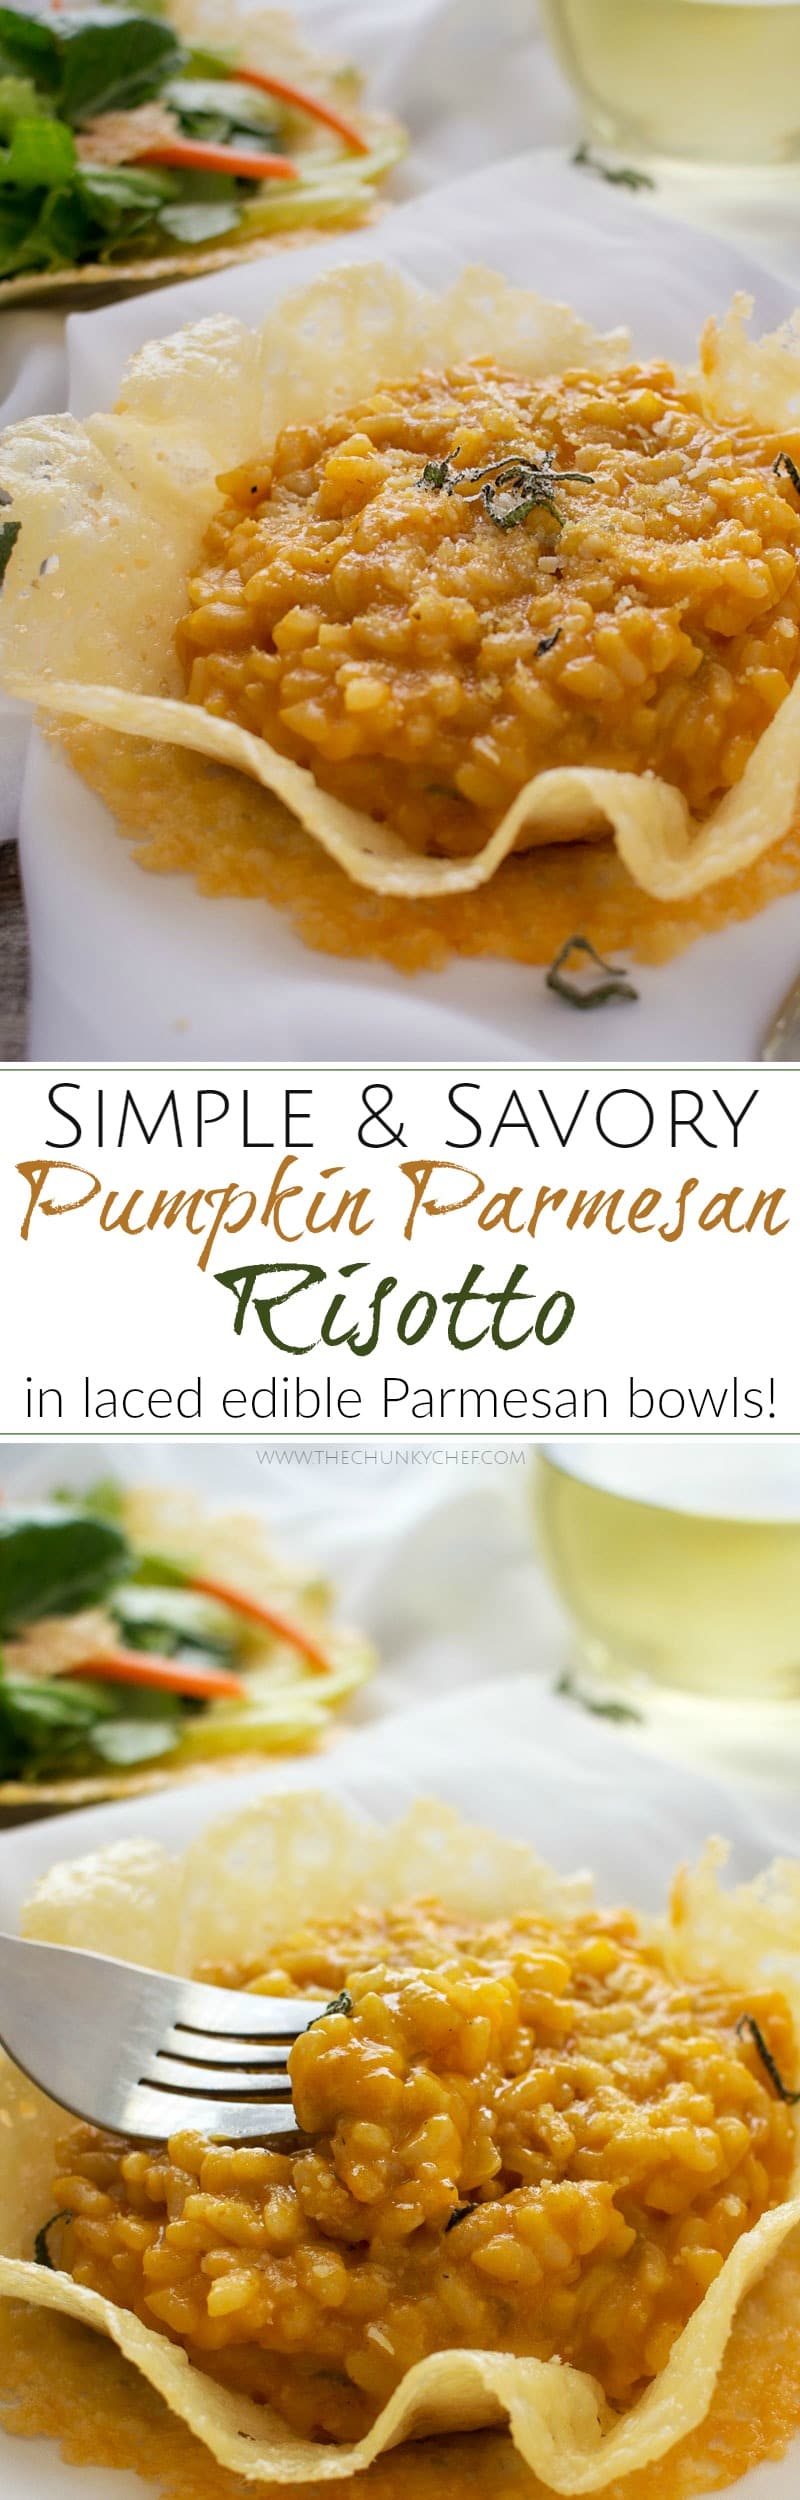 Pumpkin Risotto in Parmesan Bowls | Classic Fall flavors come together in this ultra creamy pumpkin risotto topped with fresh sage and a sprinkle of Parmesan... served in edible bowls!!